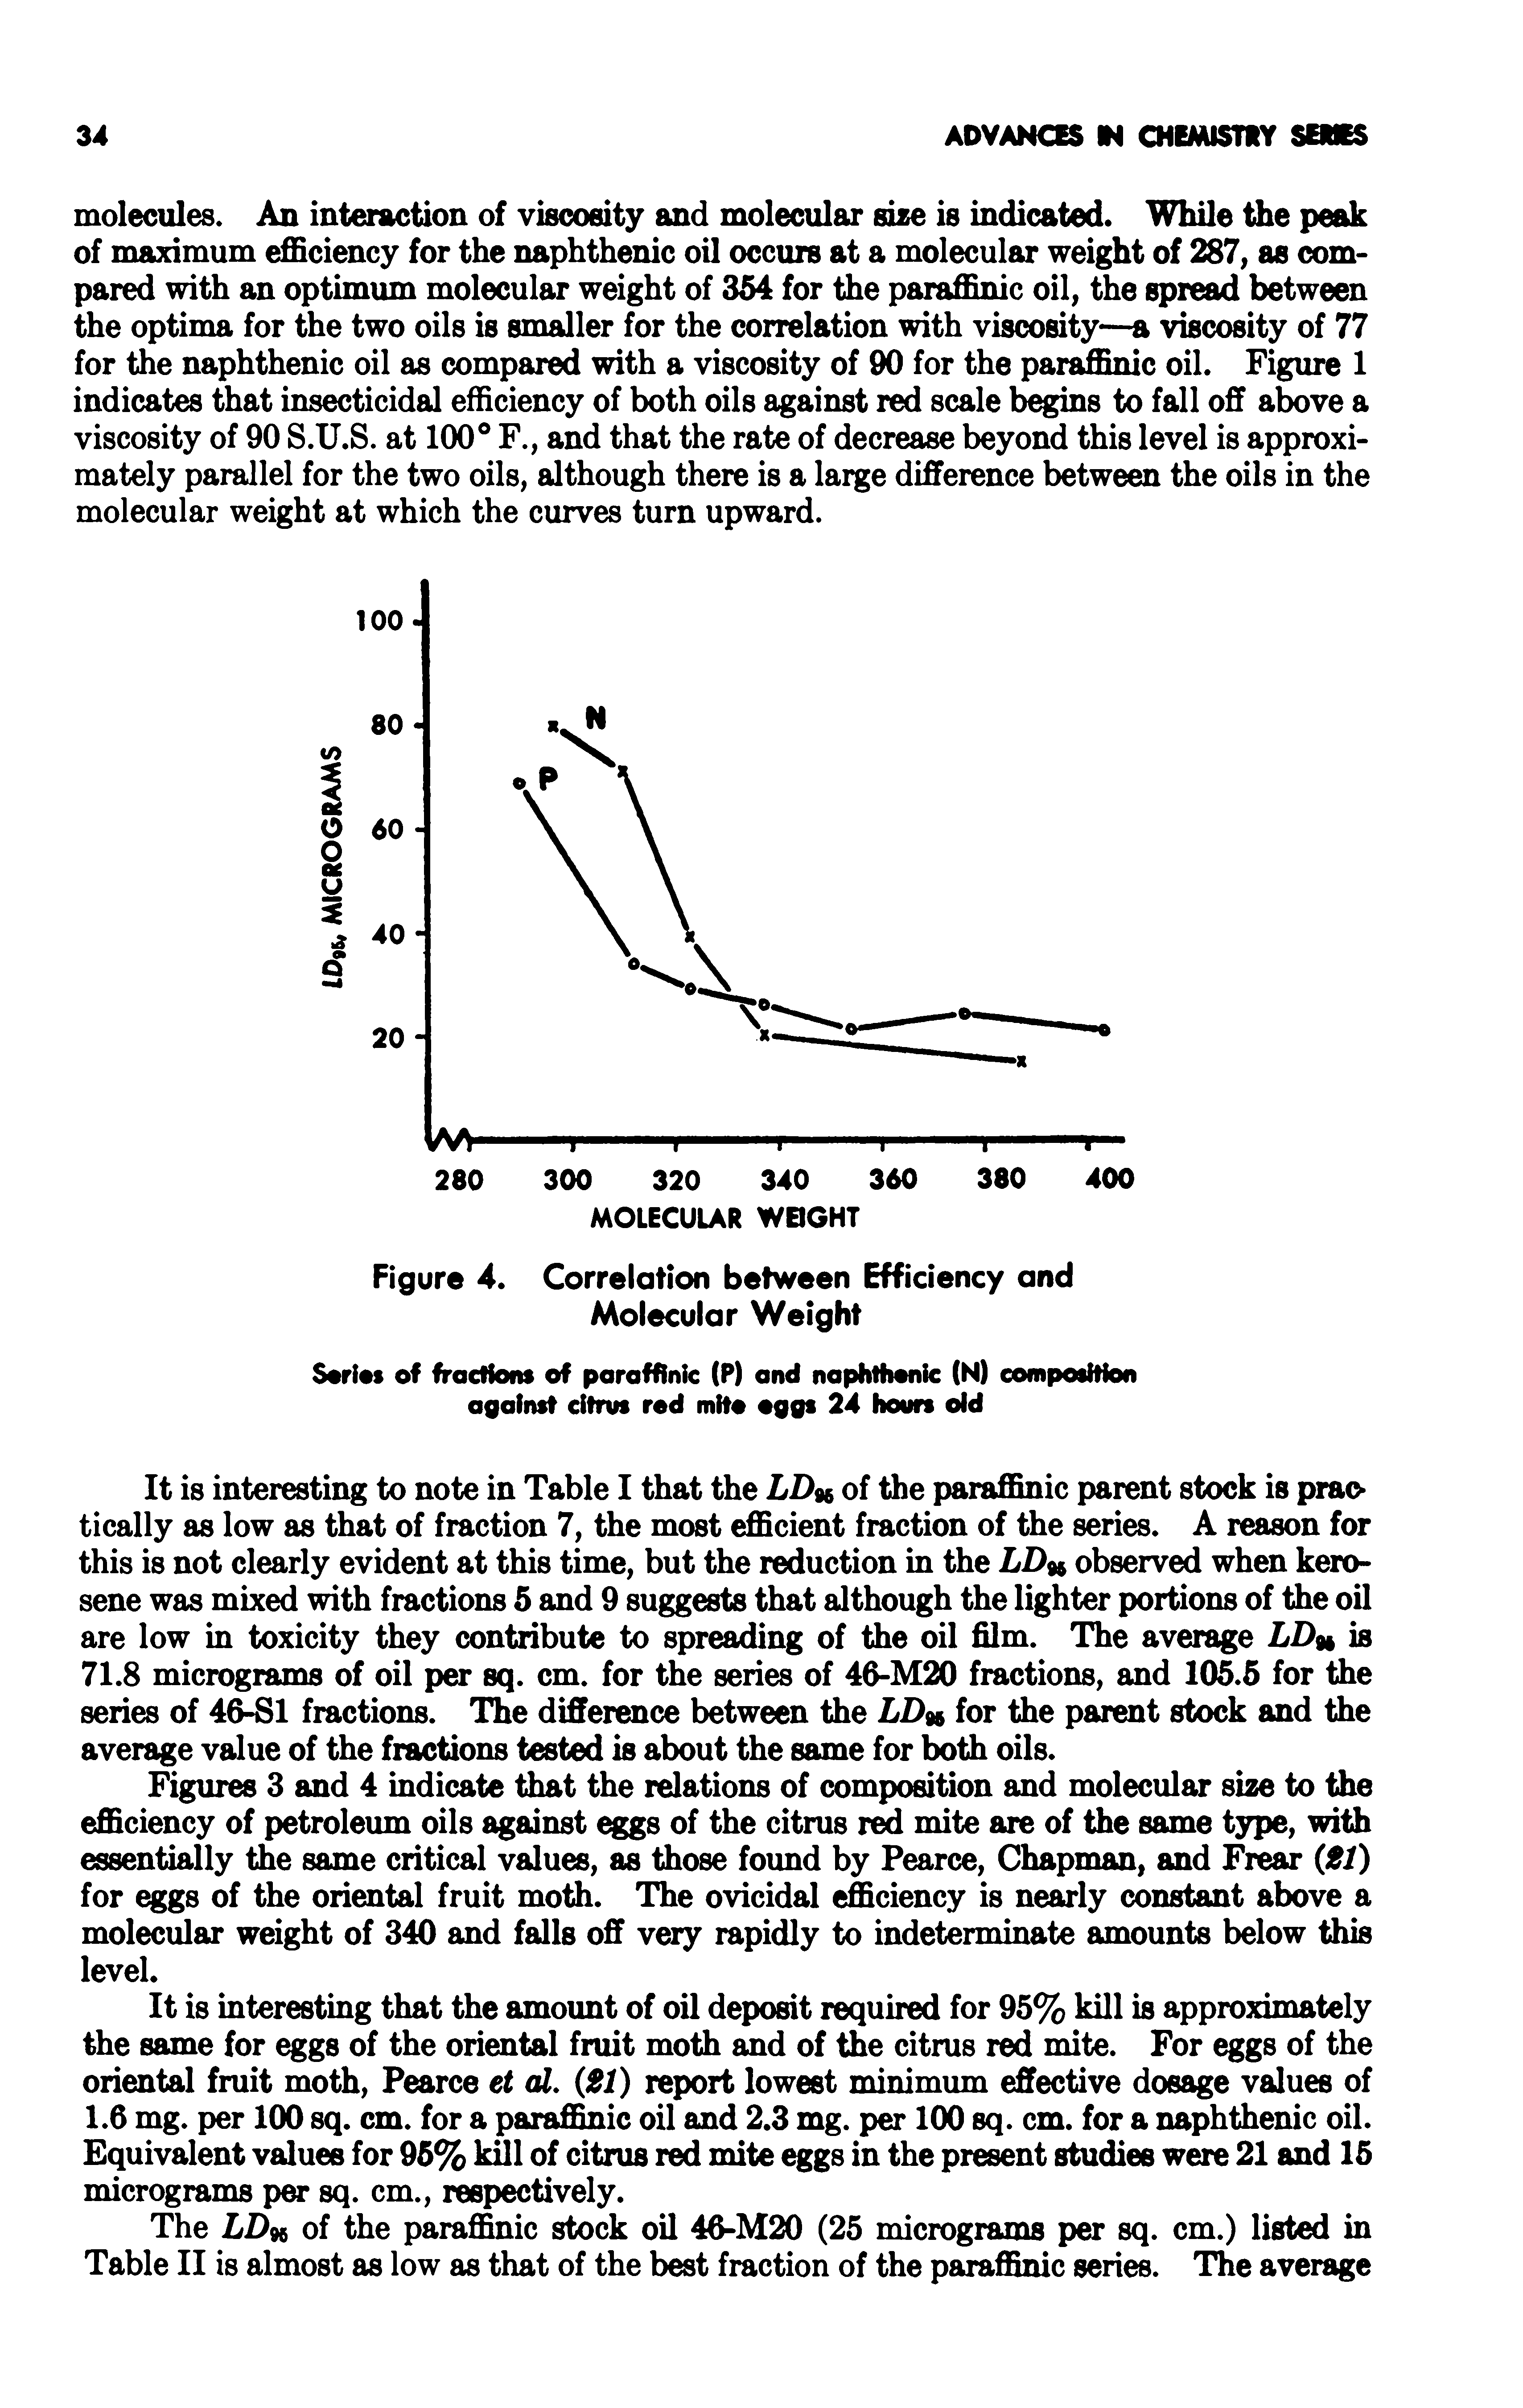 Figures 3 and 4 indicate that the relations of composition and molecular size to the efficiency of petroleum oils against eggs of the citrus r mite are of the same type, with essentially the same critical values, as those foimd by Pearce, Chapman, and Frear (ff) for eggs of the oriental fruit moth. The ovicidal efficiency is nearly constant above a molecular weight of 340 and falls off very rapidly to indeterminate amounts below this level.